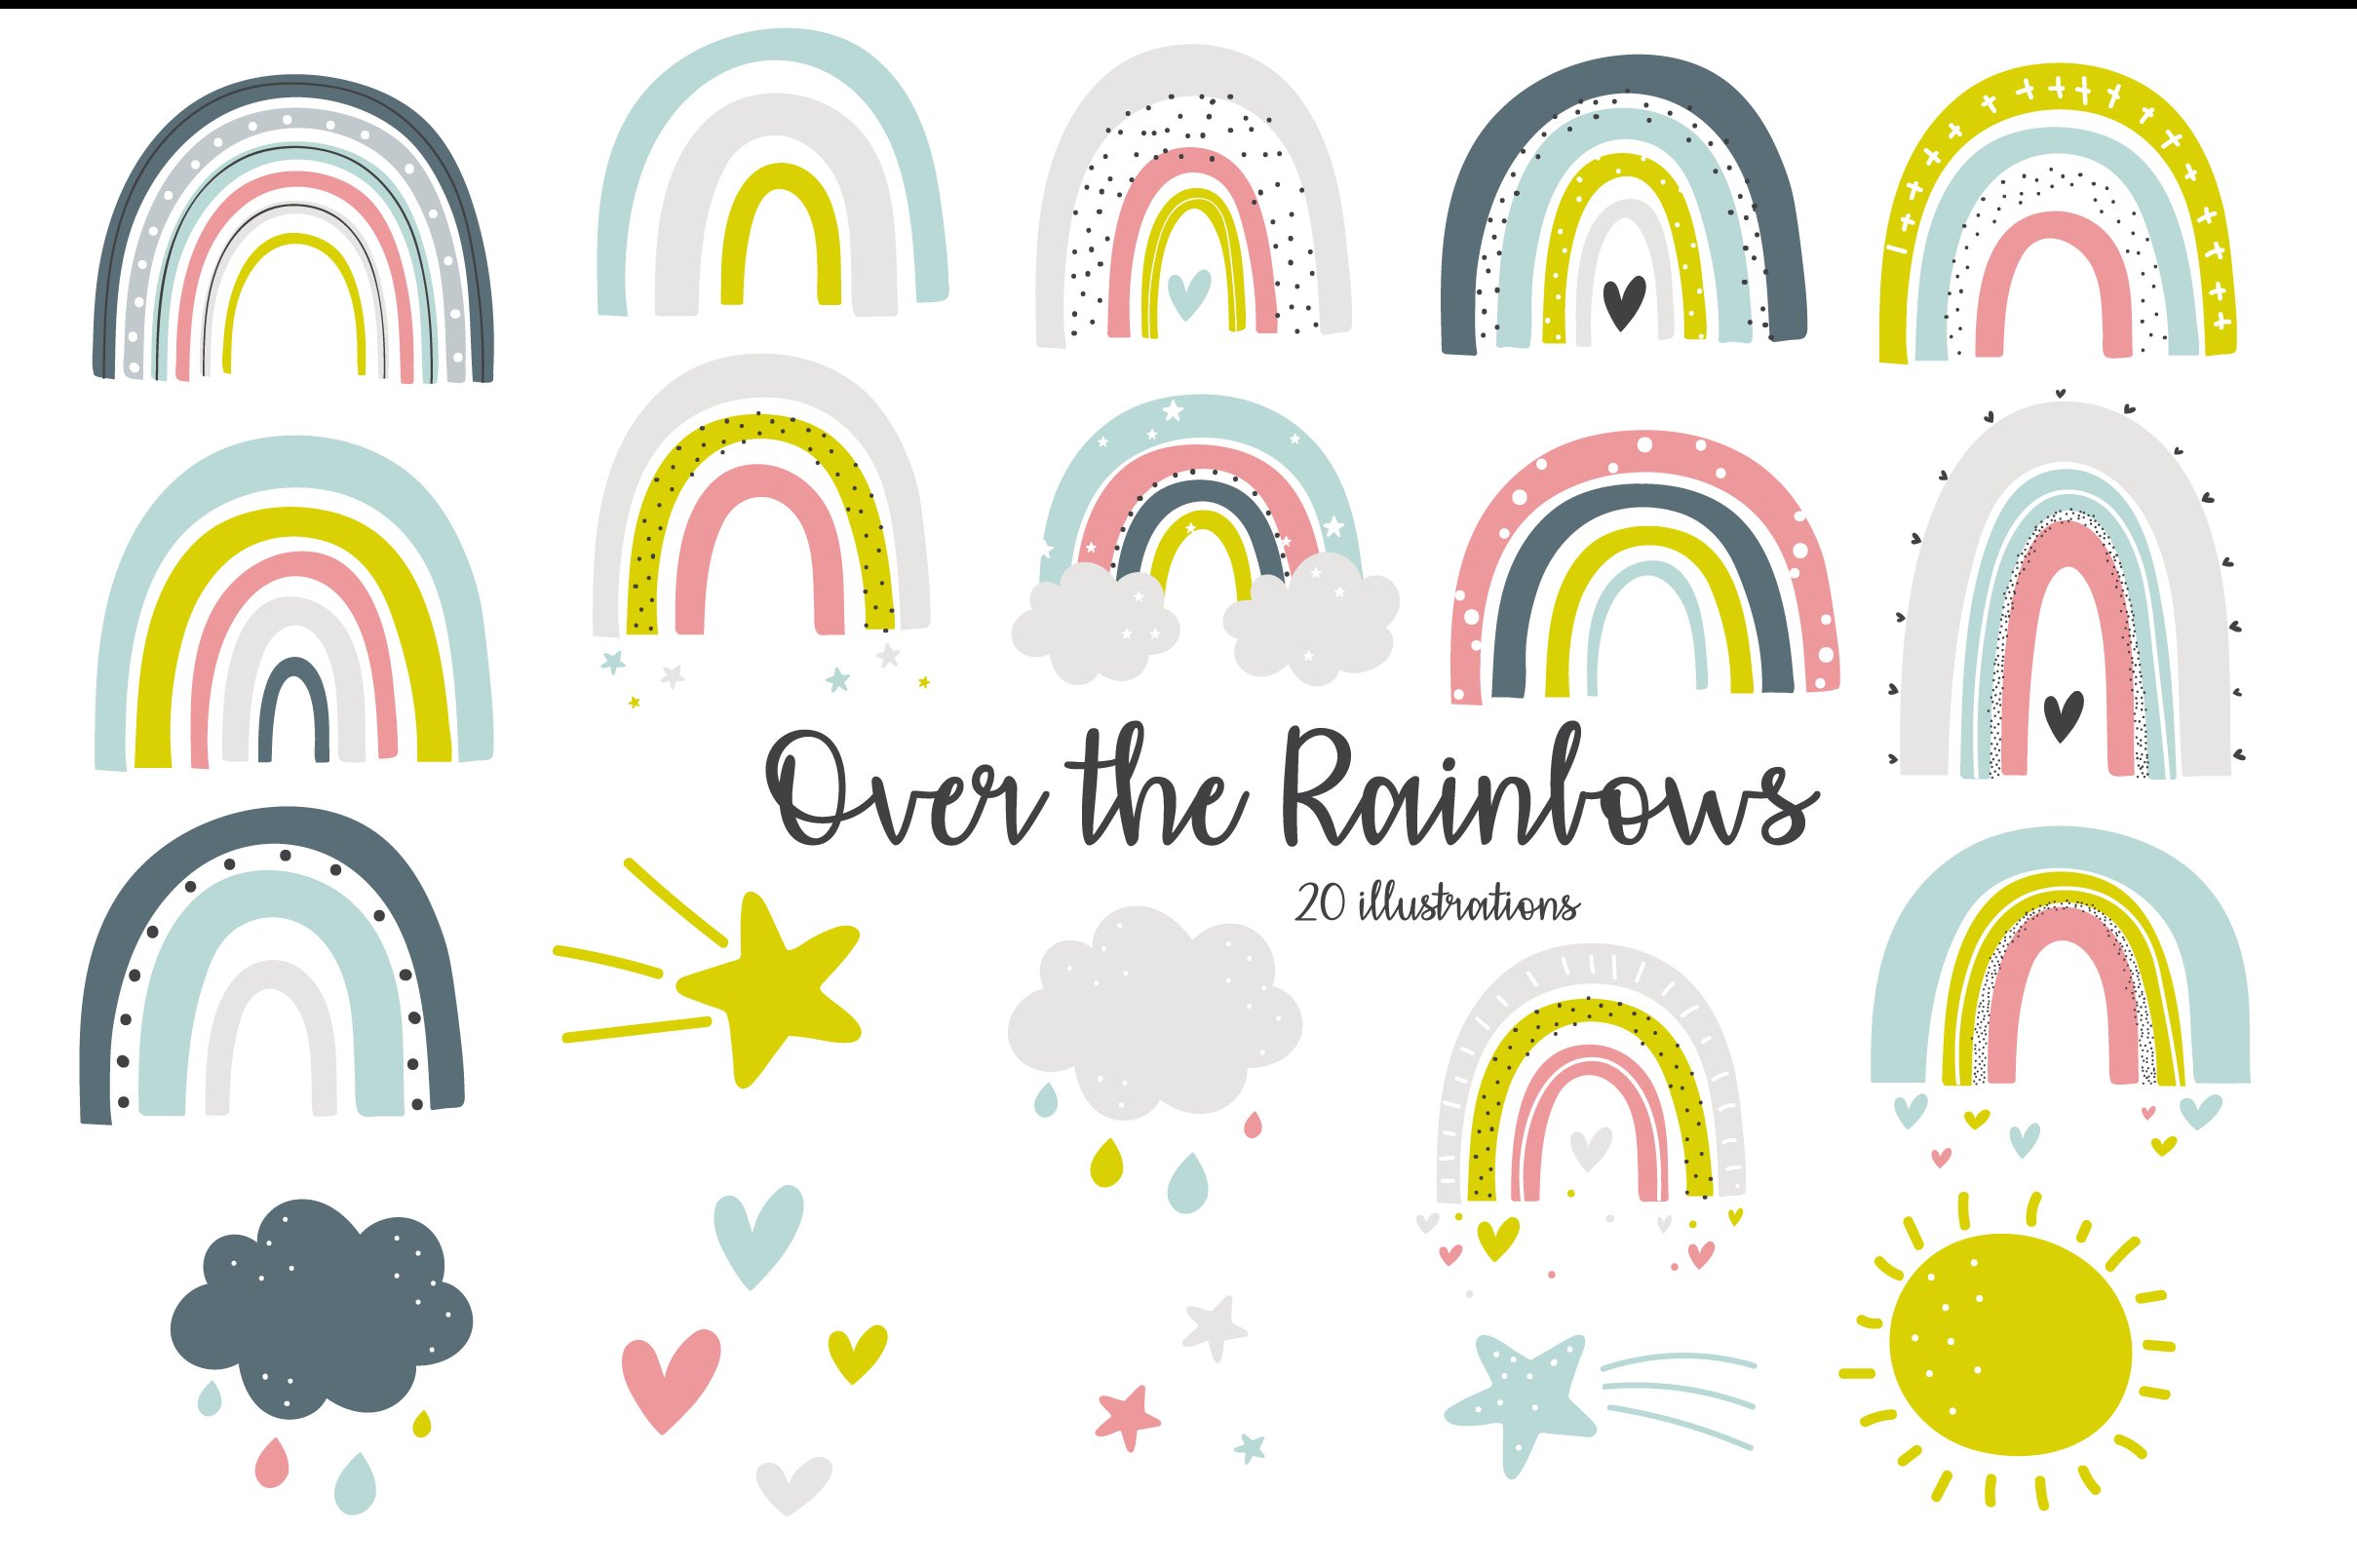 Over the Rainbows cover image.